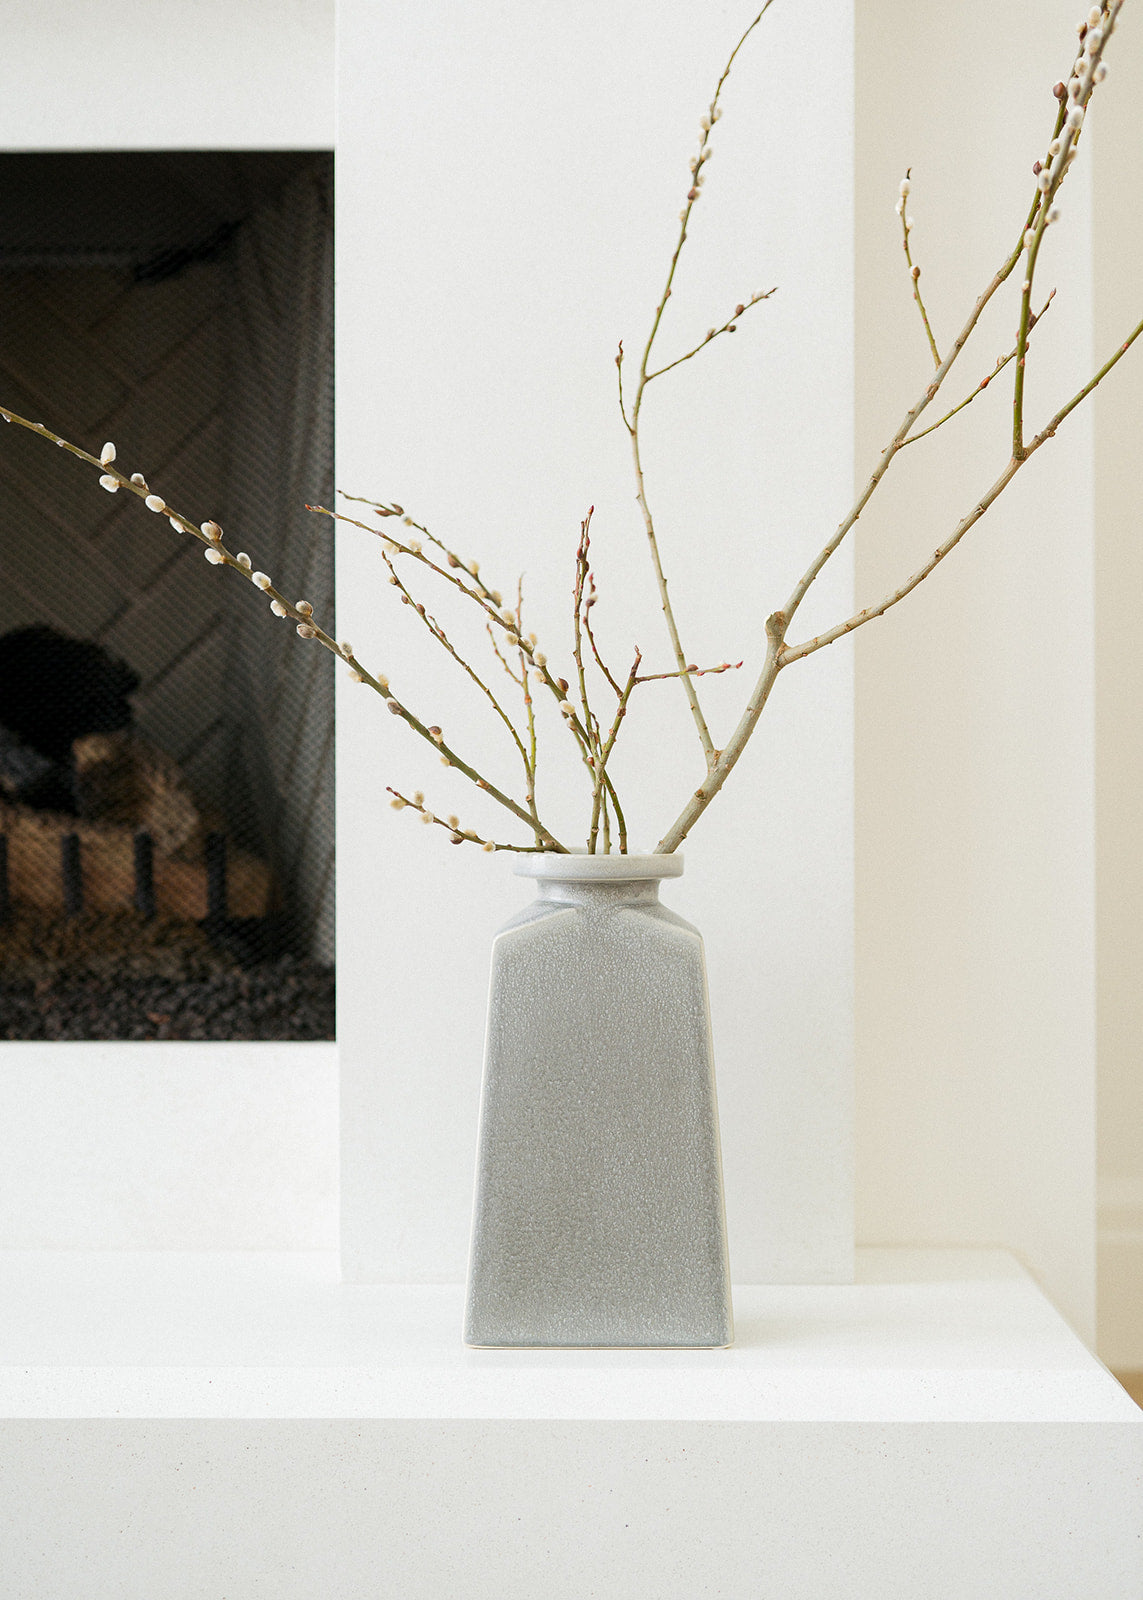 Curio Collective Santantonio vase is an oyster shell grey glaze on a beautiful classic ceramic vase.